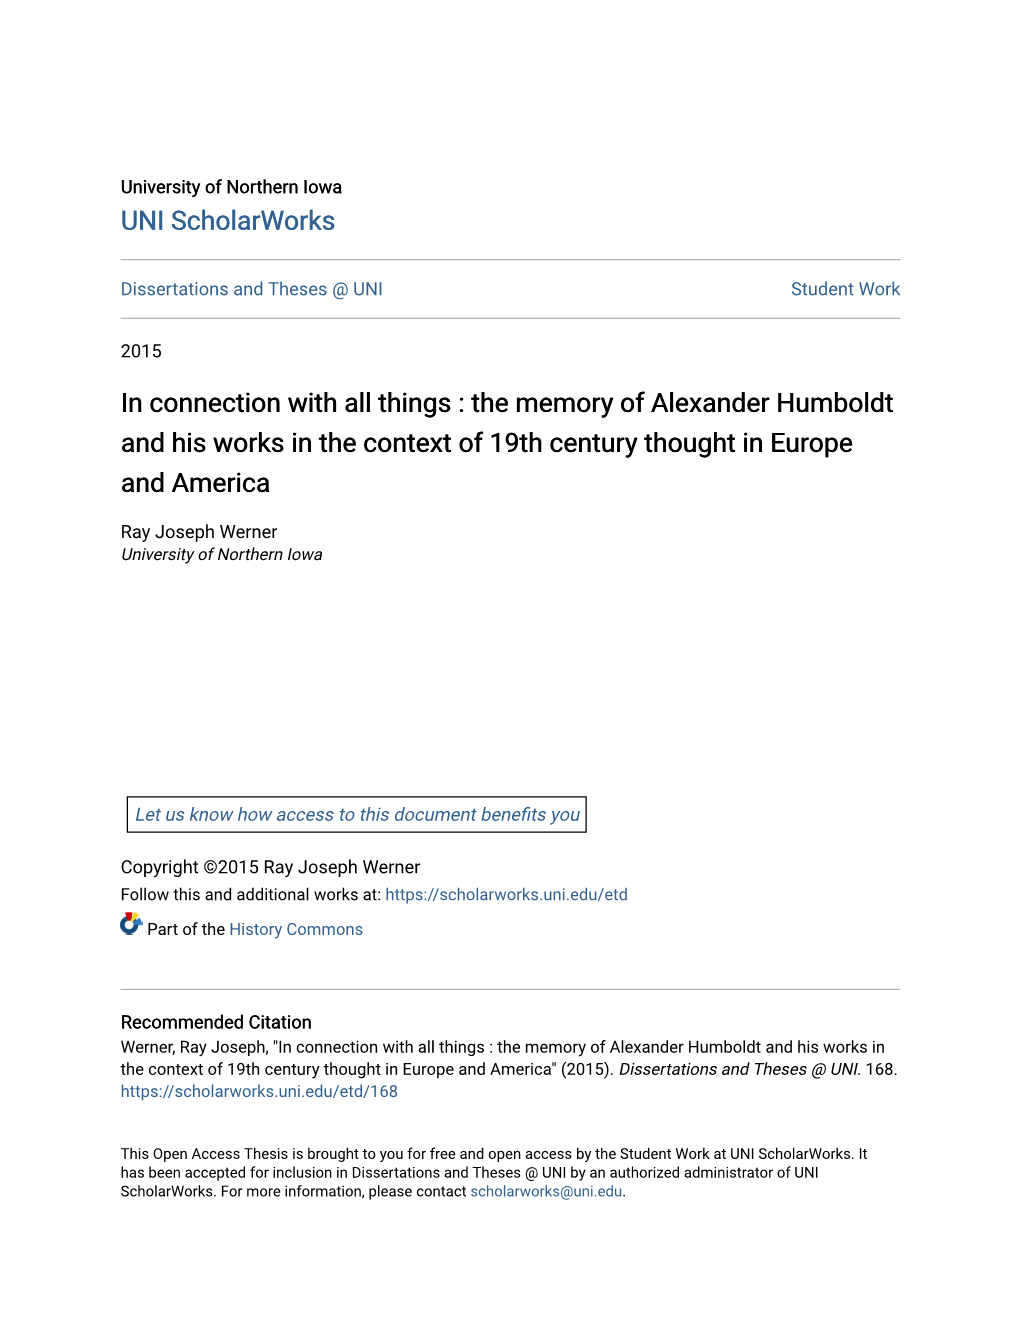 The Memory of Alexander Humboldt and His Works in the Context of 19Th Century Thought in Europe and America